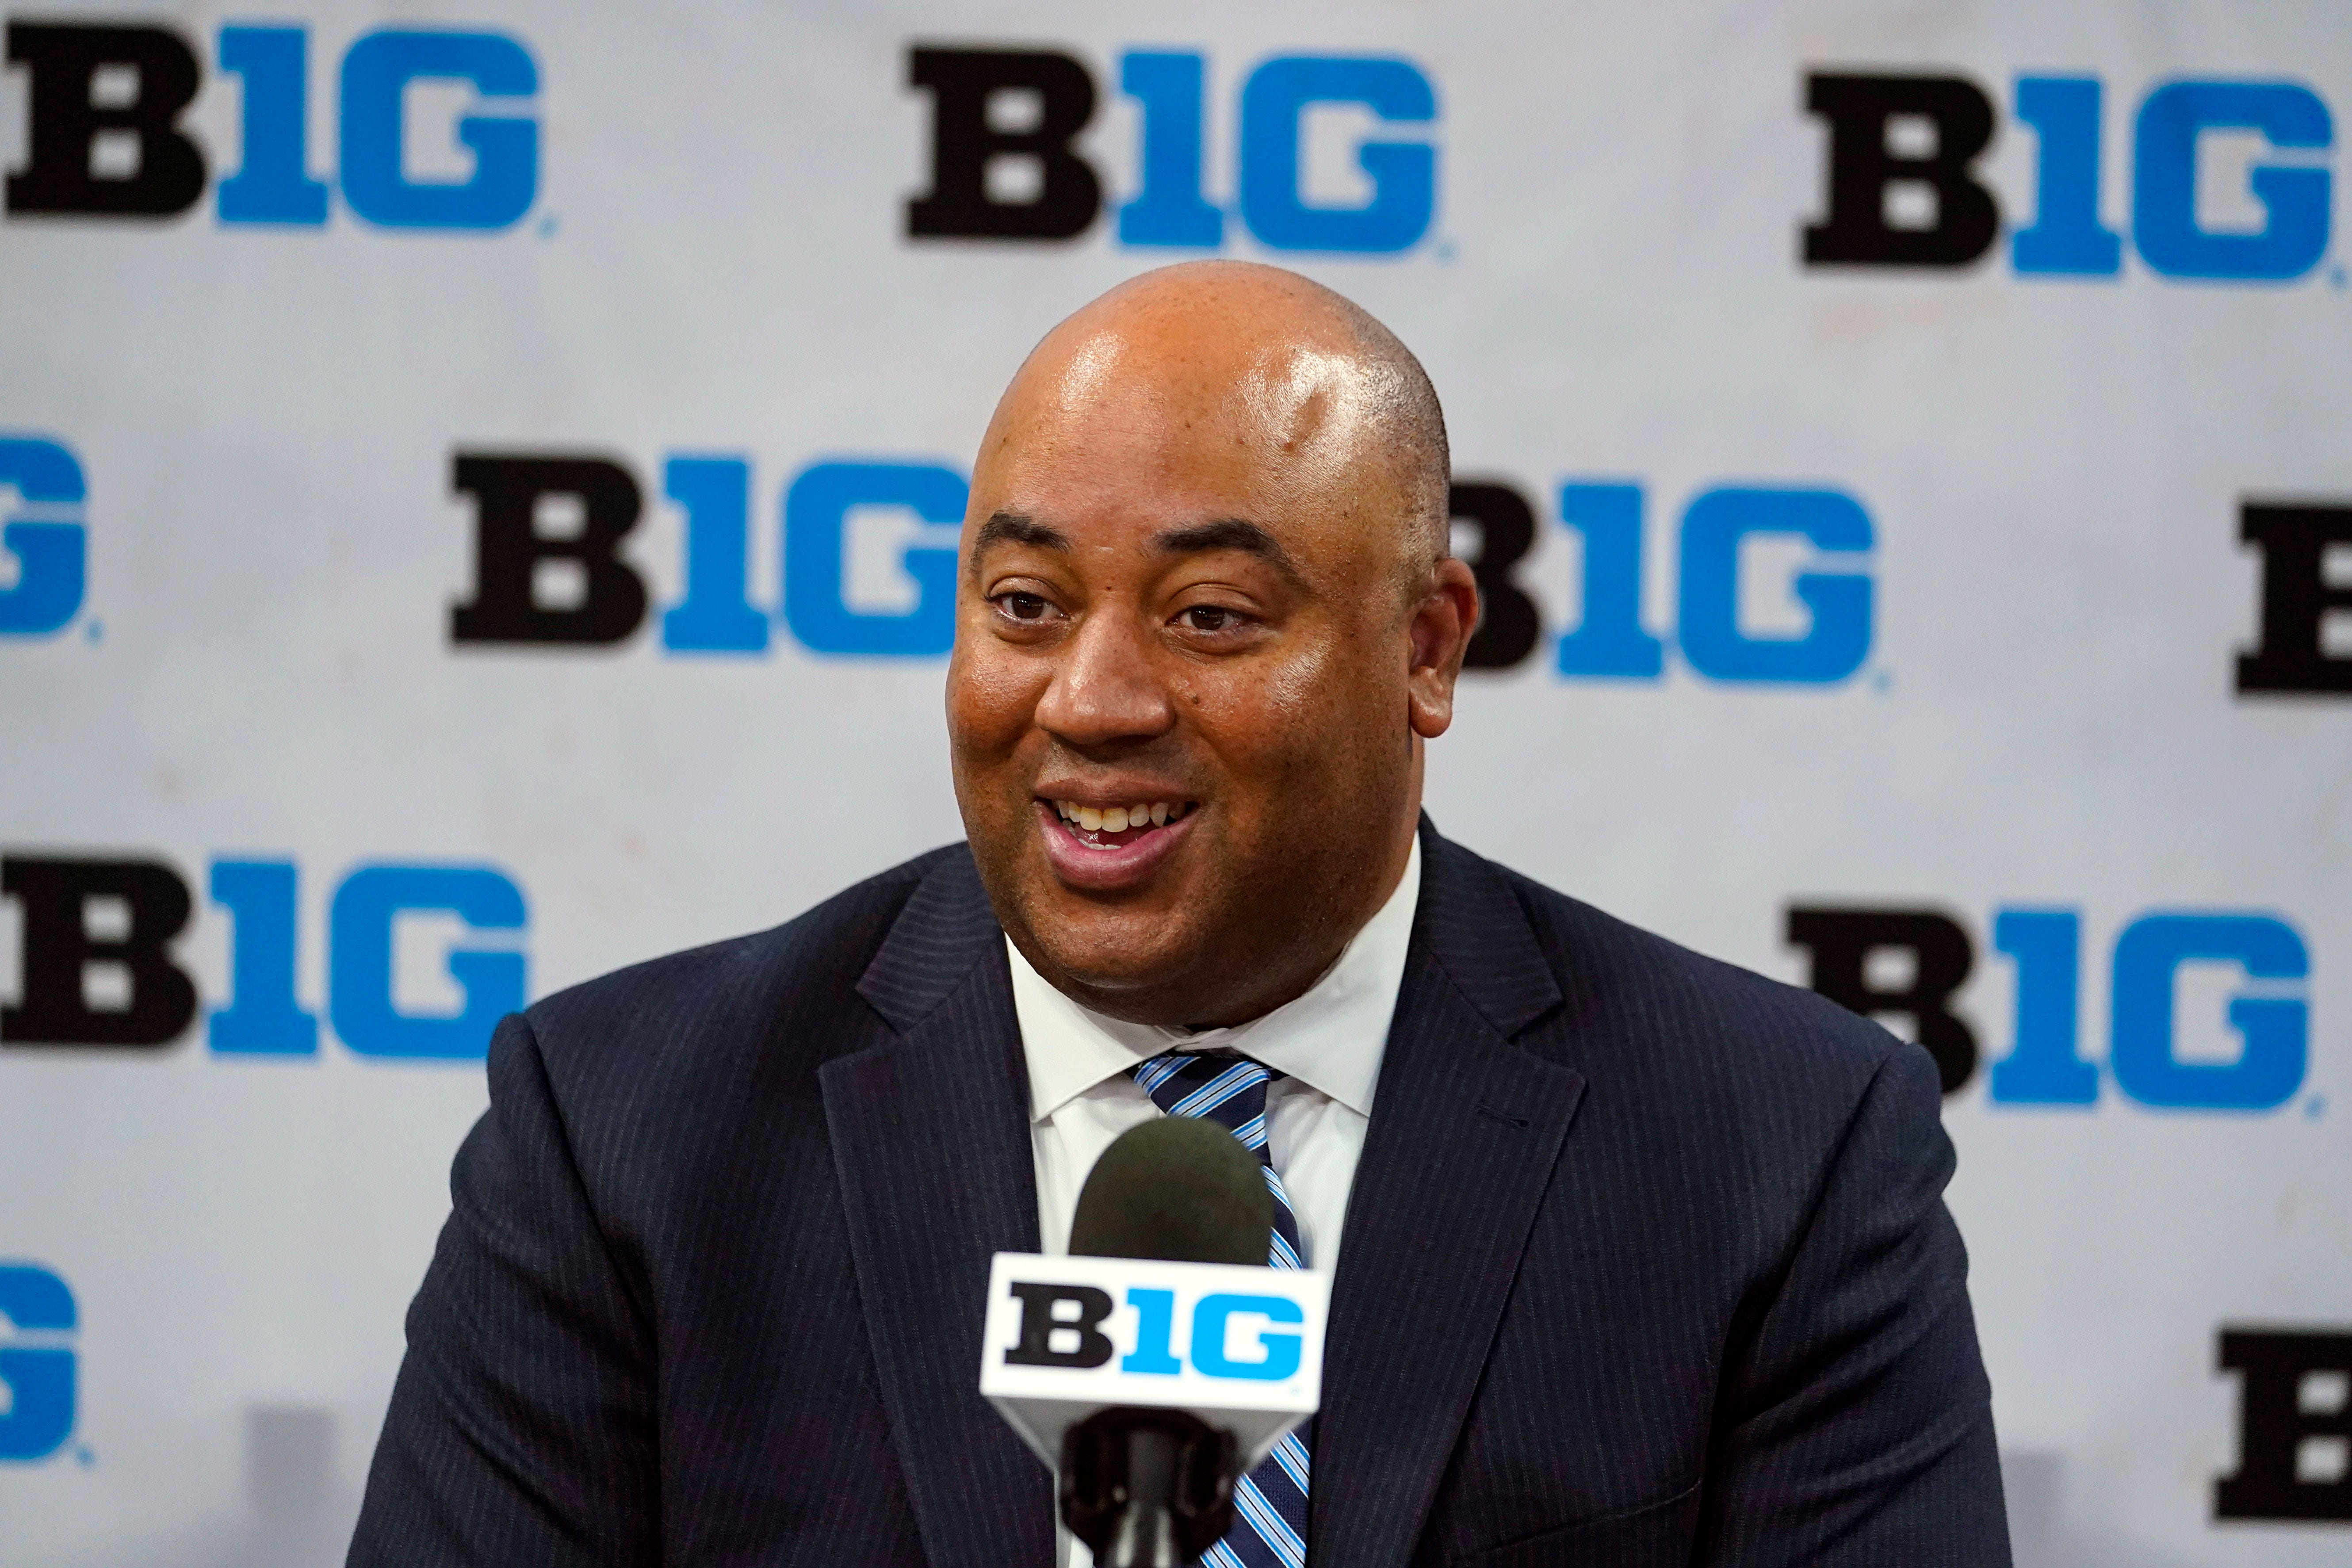 Notre Dame to hire Micah Shrewsberry after two seasons at Penn State, per reports